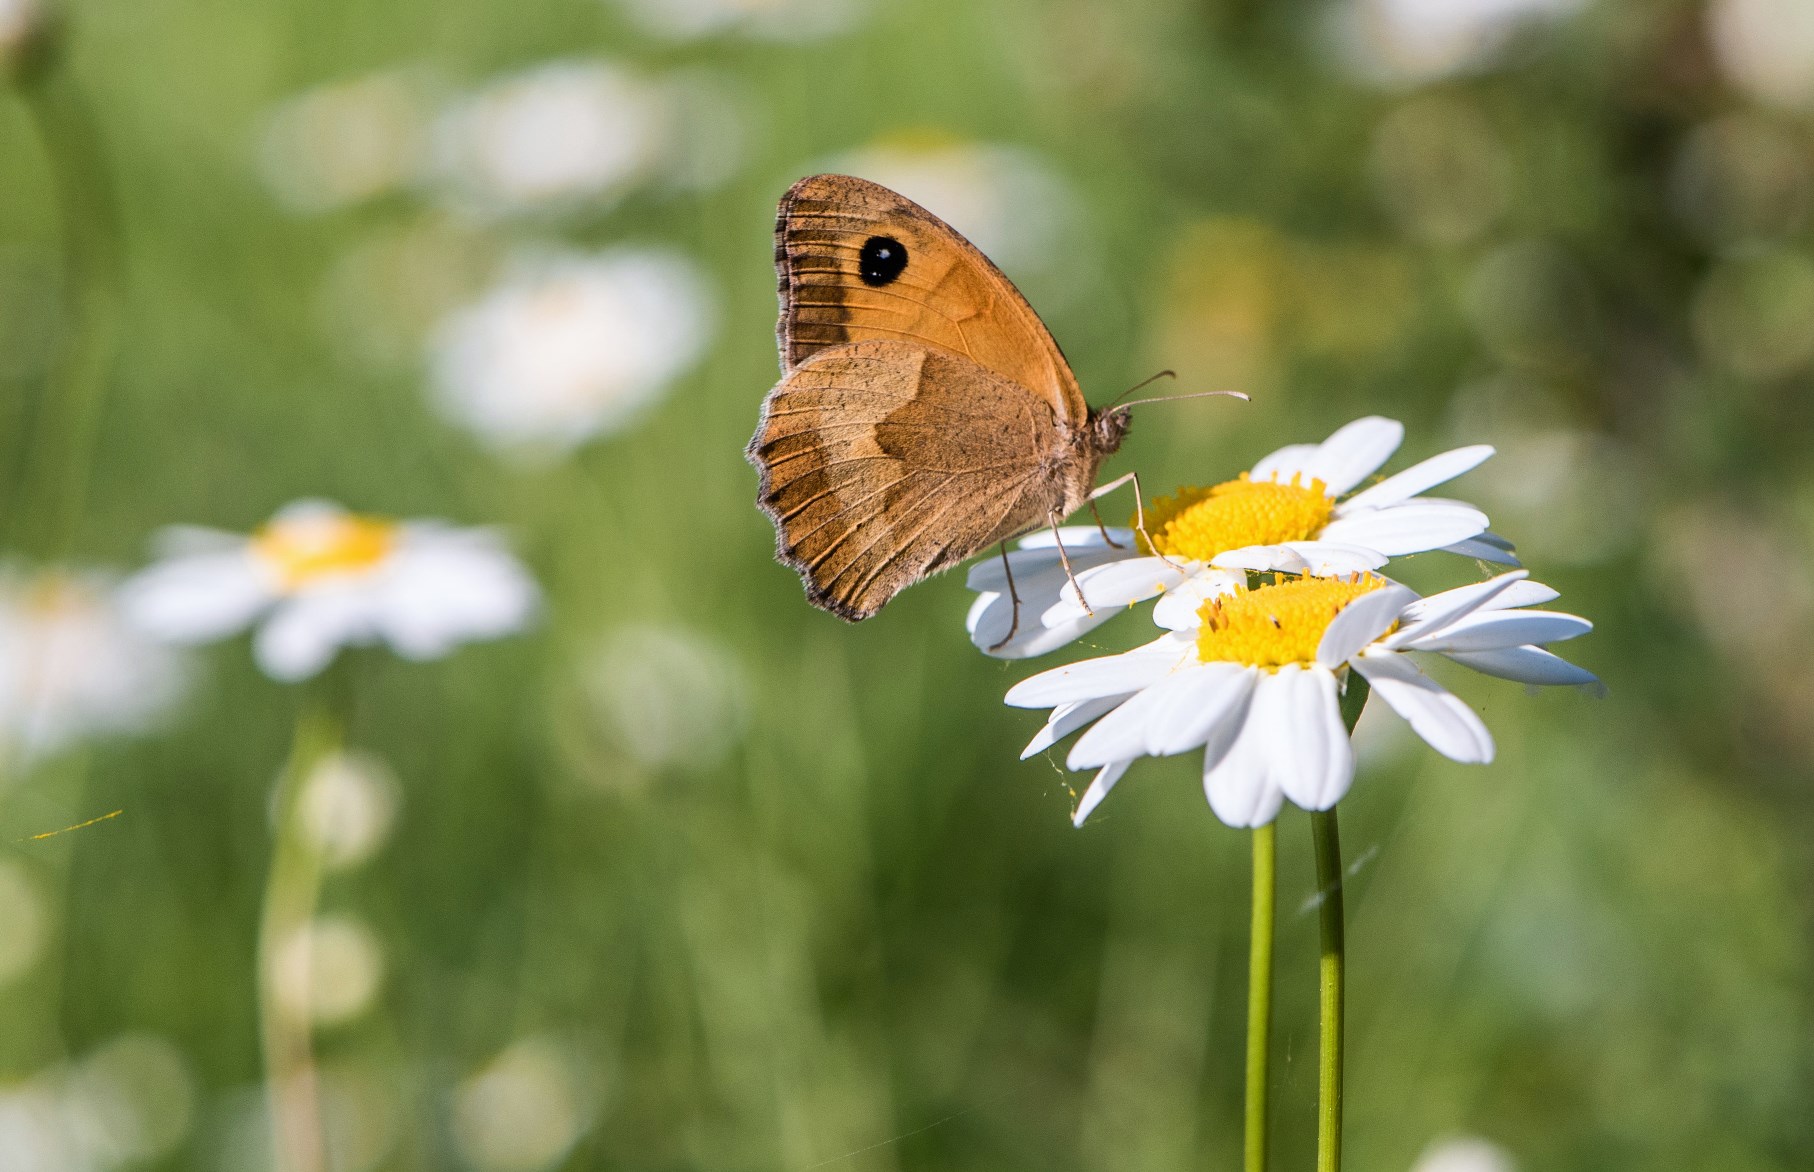 The Daisies and the butterfly...